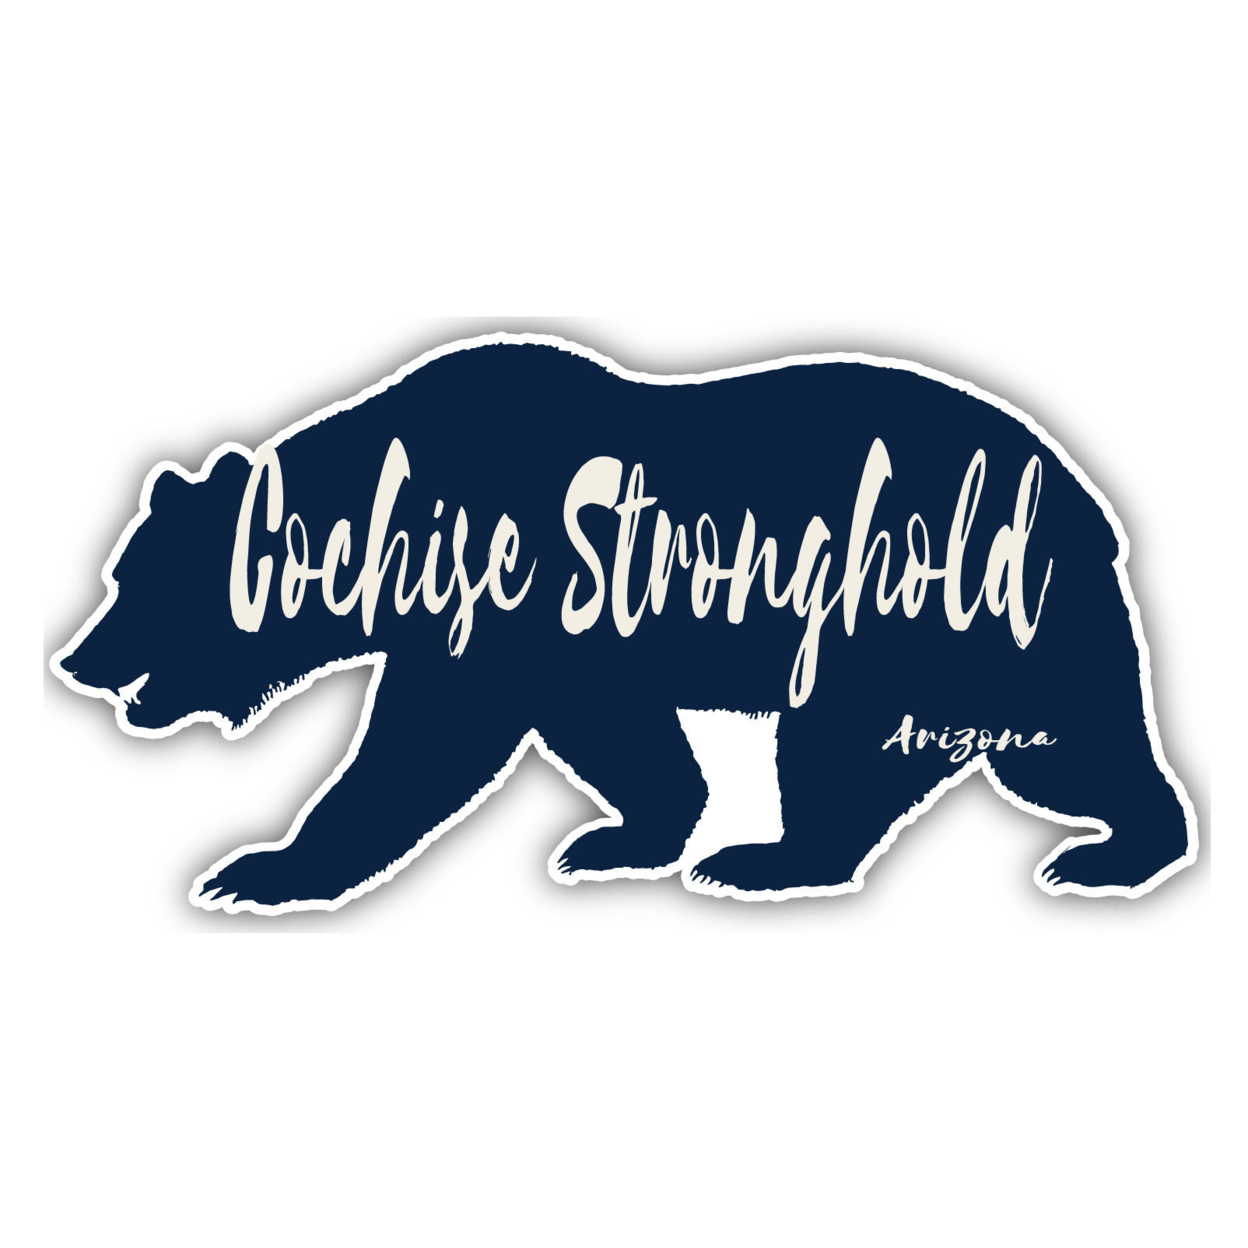 Cochise Stronghold Arizona Souvenir Decorative Stickers (Choose Theme And Size) - 4-Pack, 12-Inch, Bear